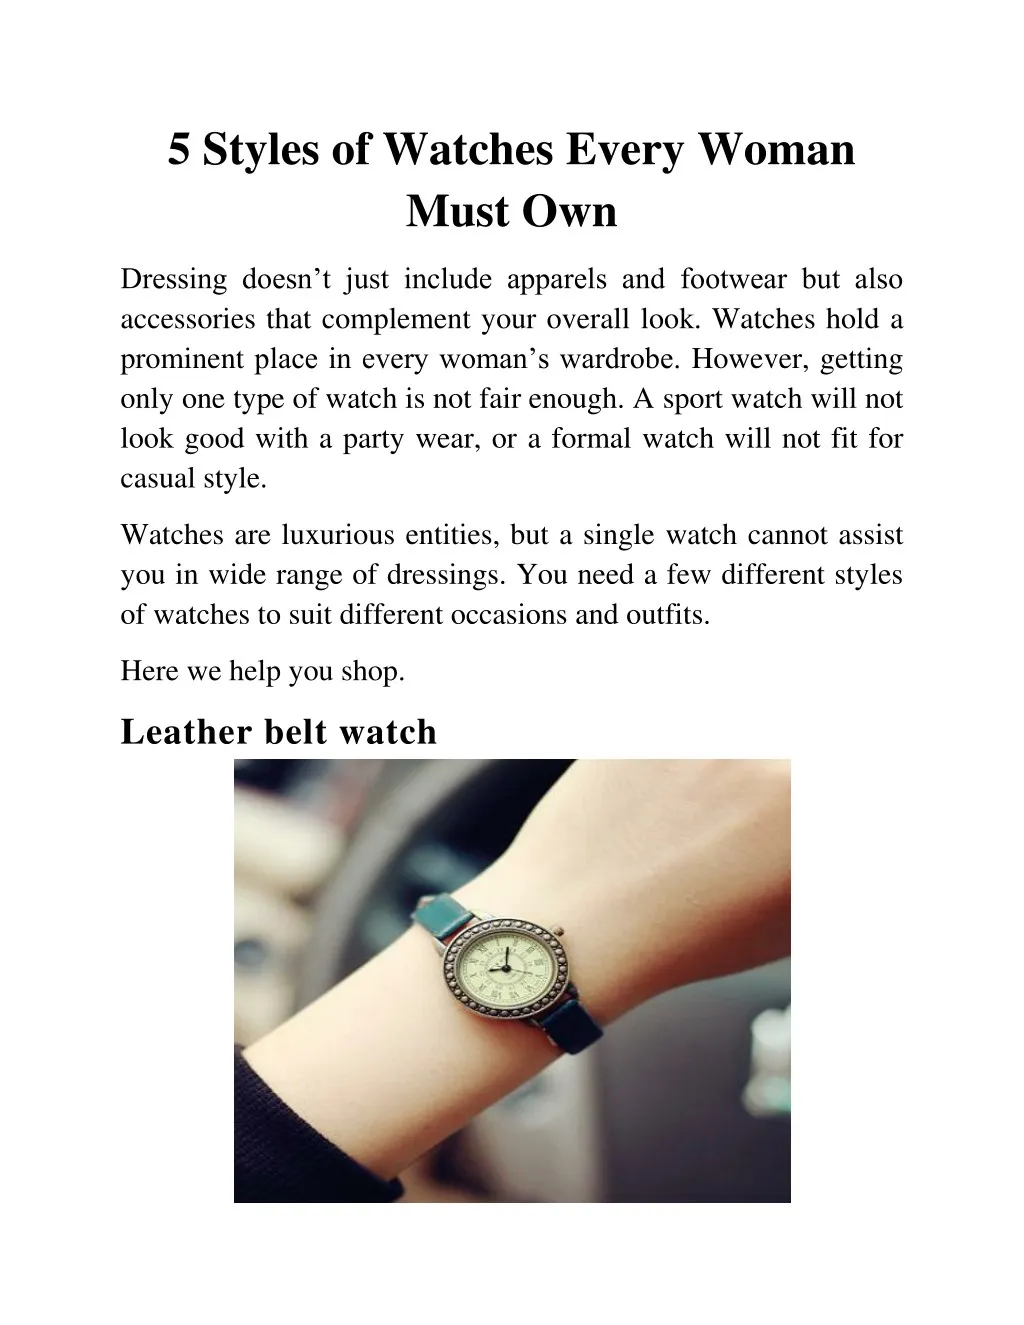 5 styles of watches every woman must own